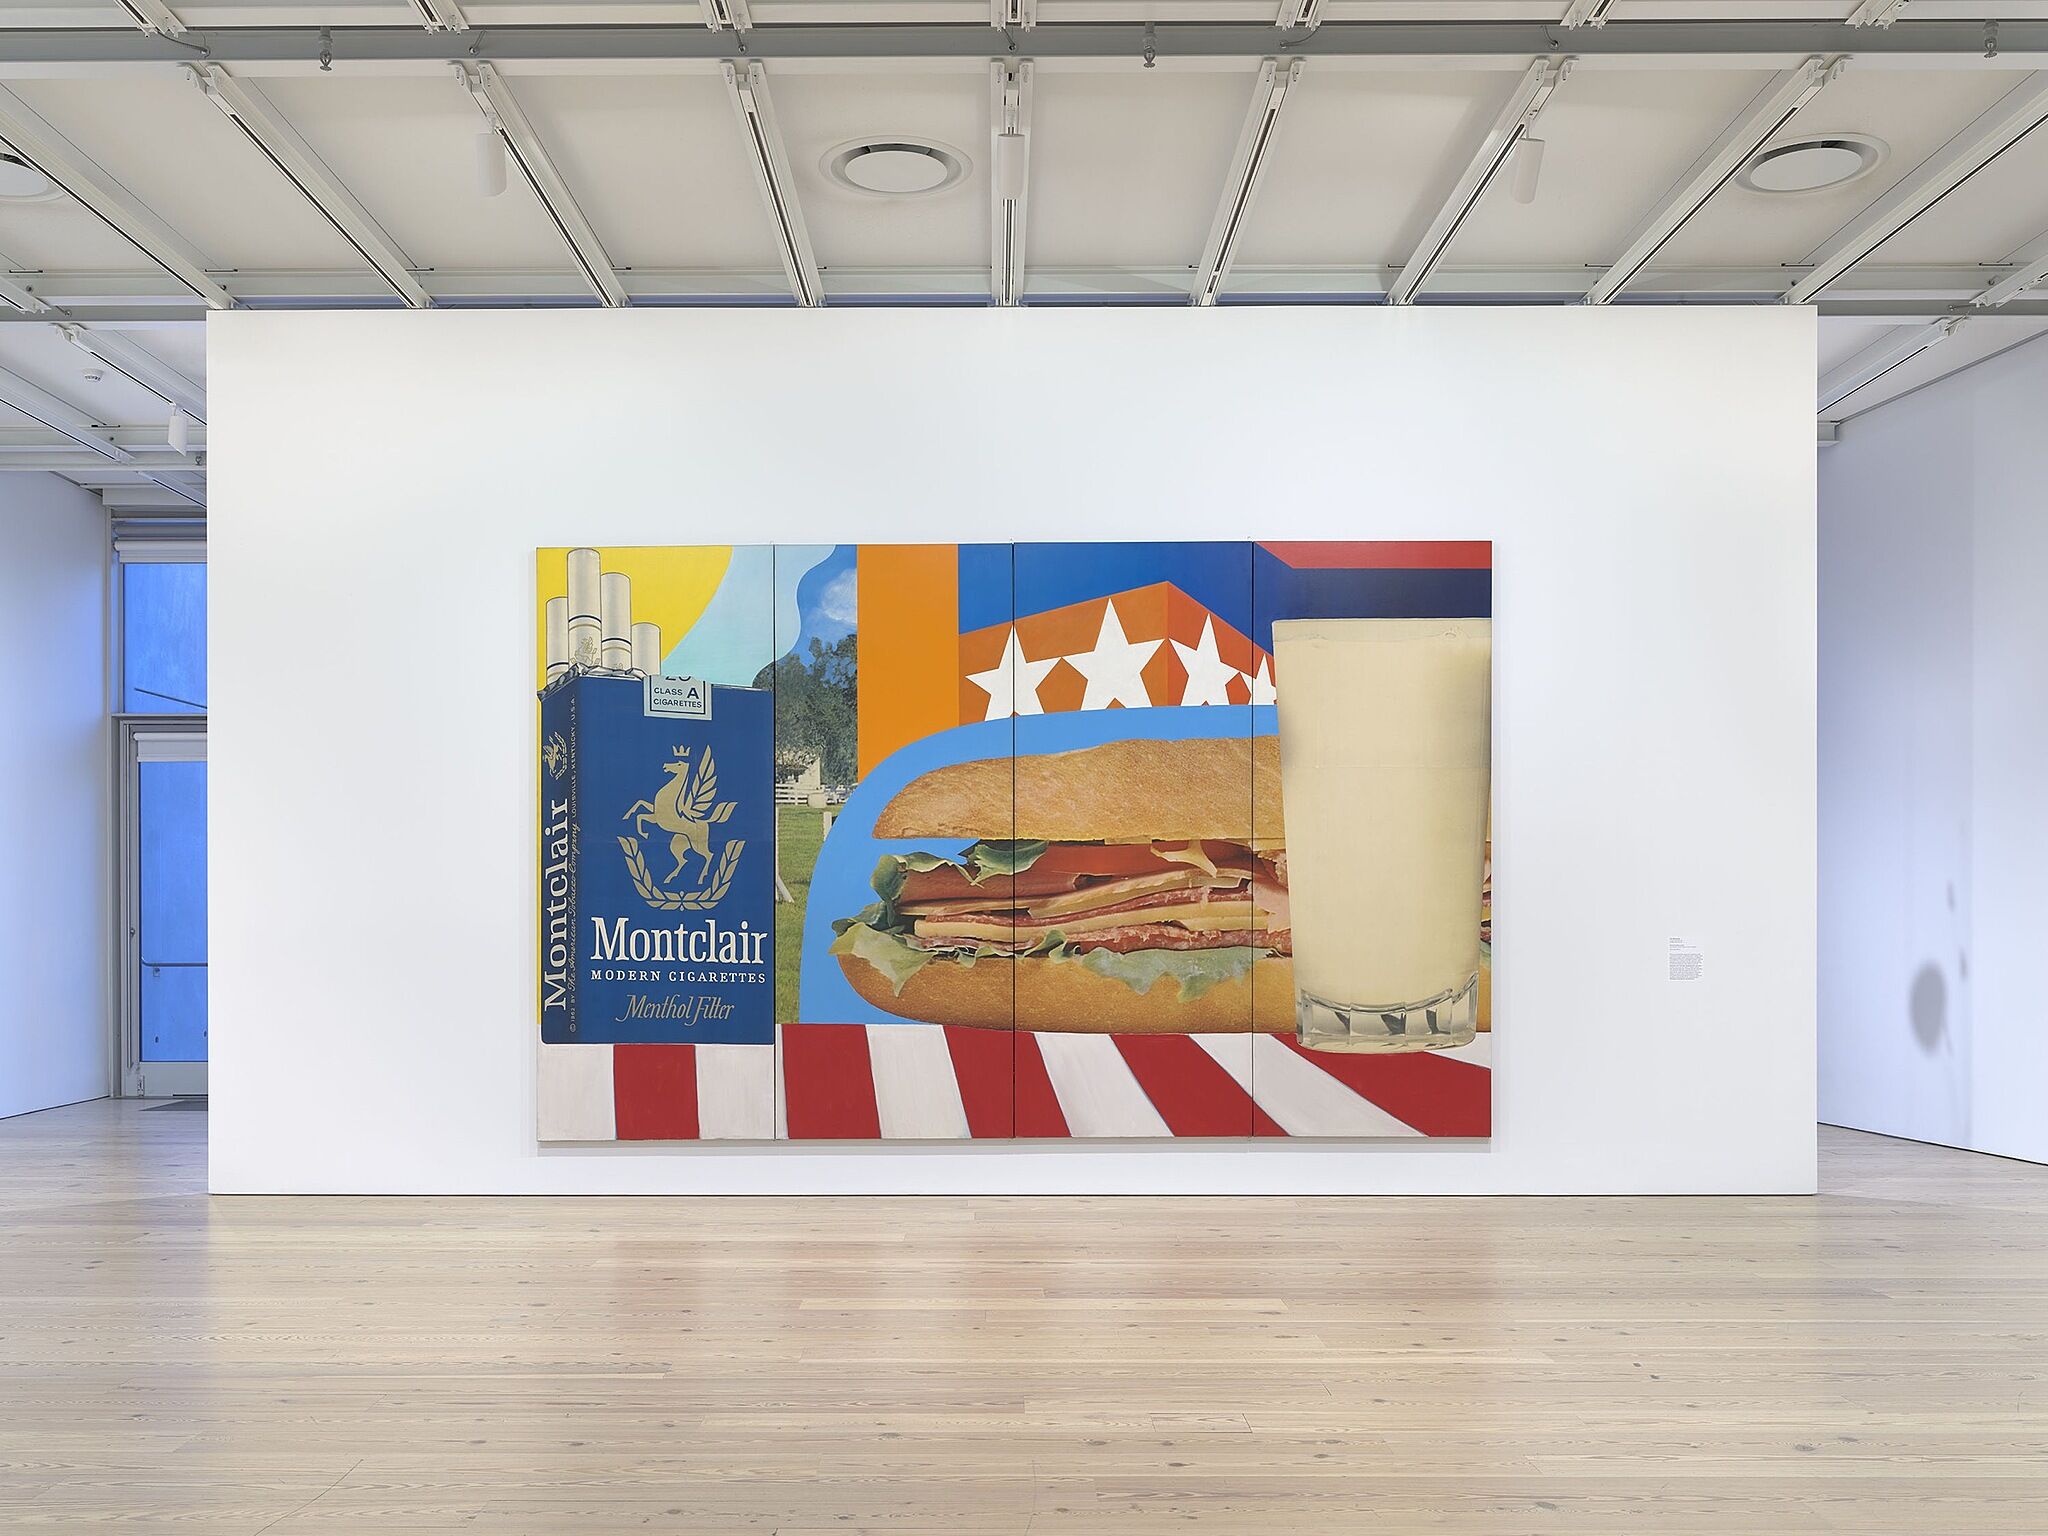 An image of the Whitney galleries with a large wall artwork